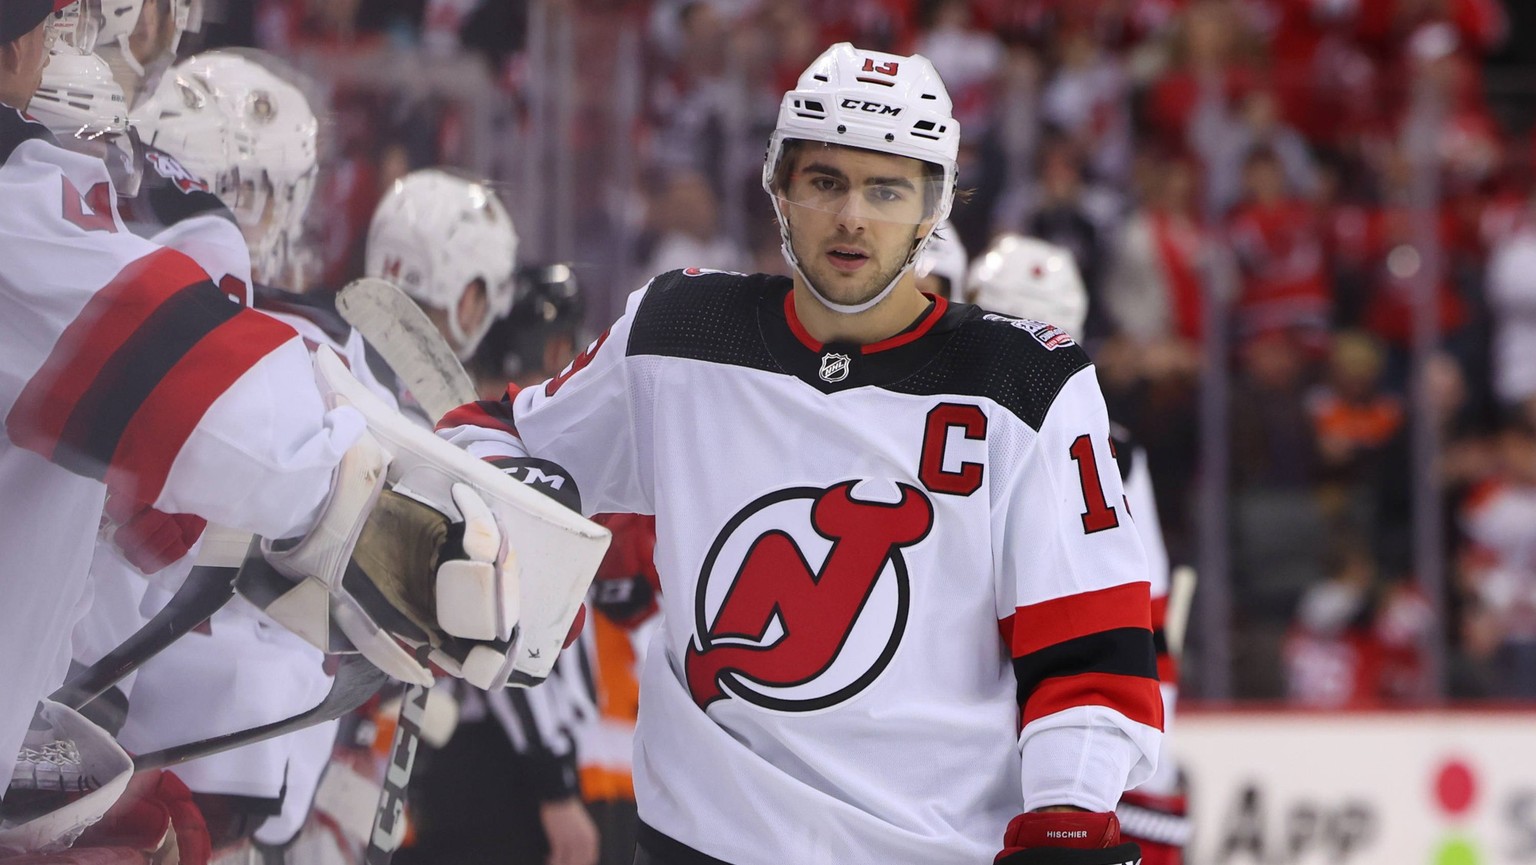 🇨🇭The New Jersey Devils name Nico Hischier as their captain